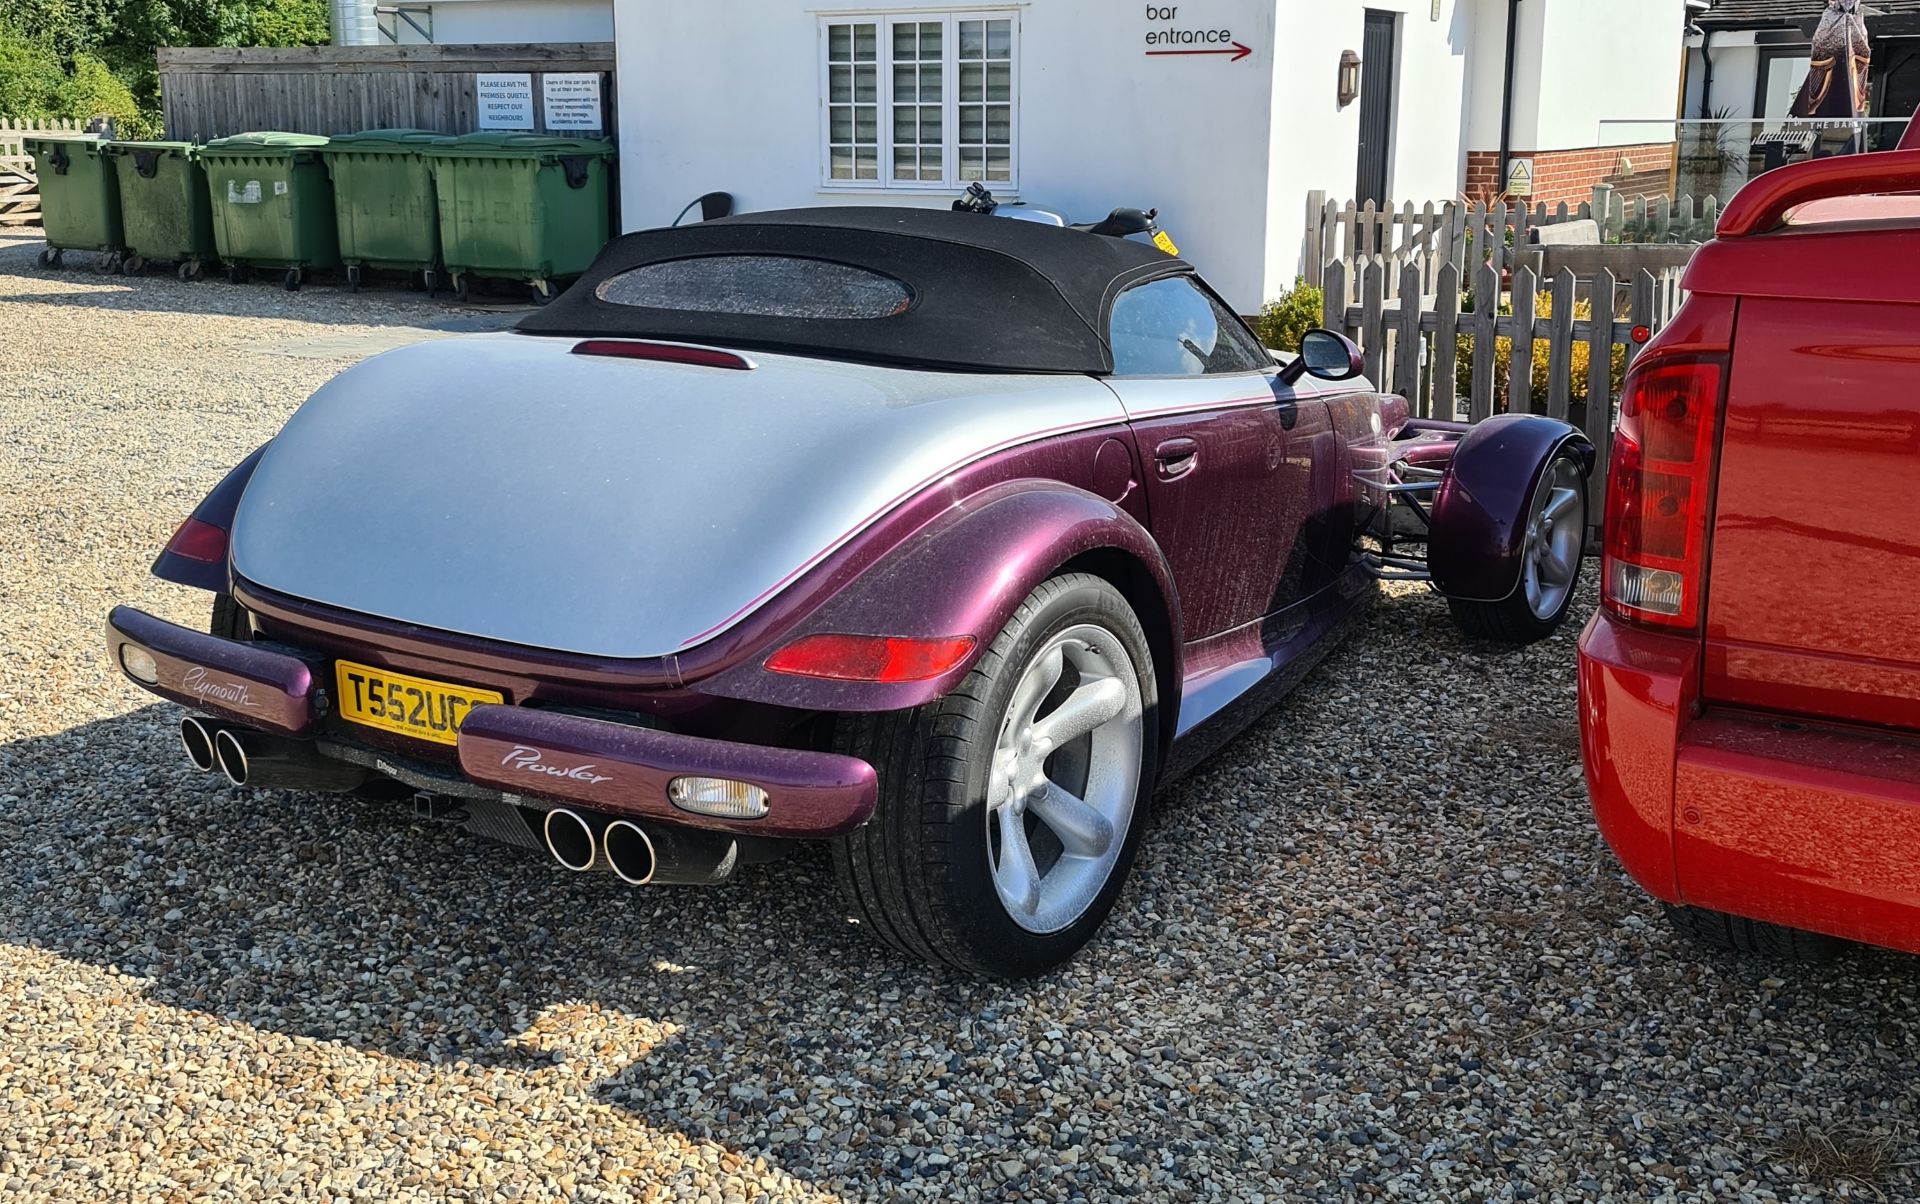 1998 CHRYSLER PLYMOUTH PROWLER V6 2 DOOR CONVERTIBLE, 3500cc PETROL ENGINE, AUTO *NO VAT* - Image 31 of 32